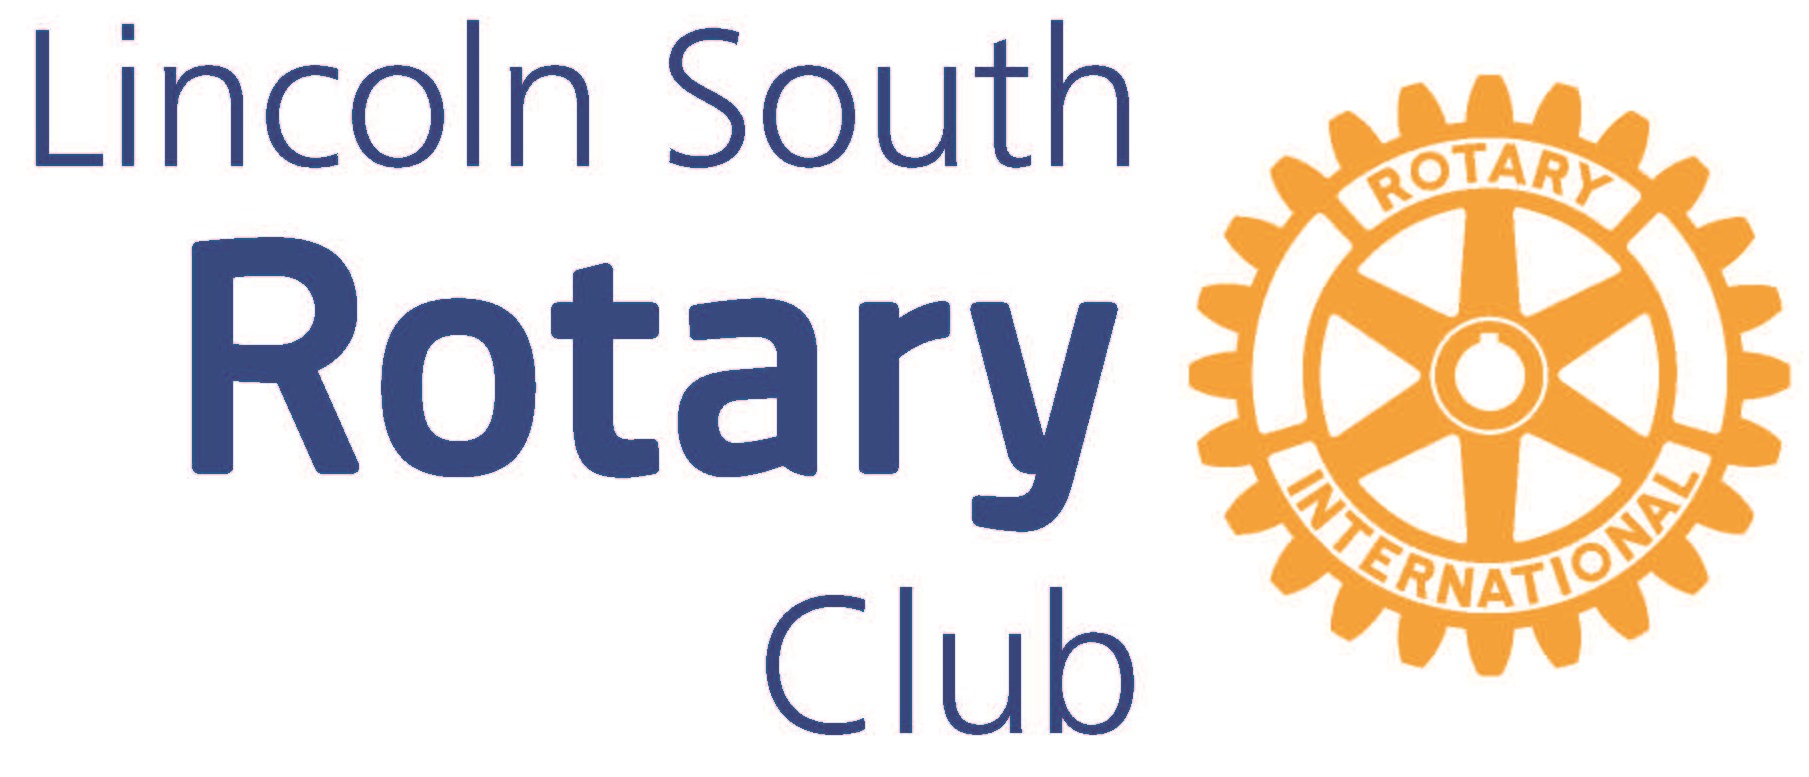 Lincoln South Rotary Club General Support